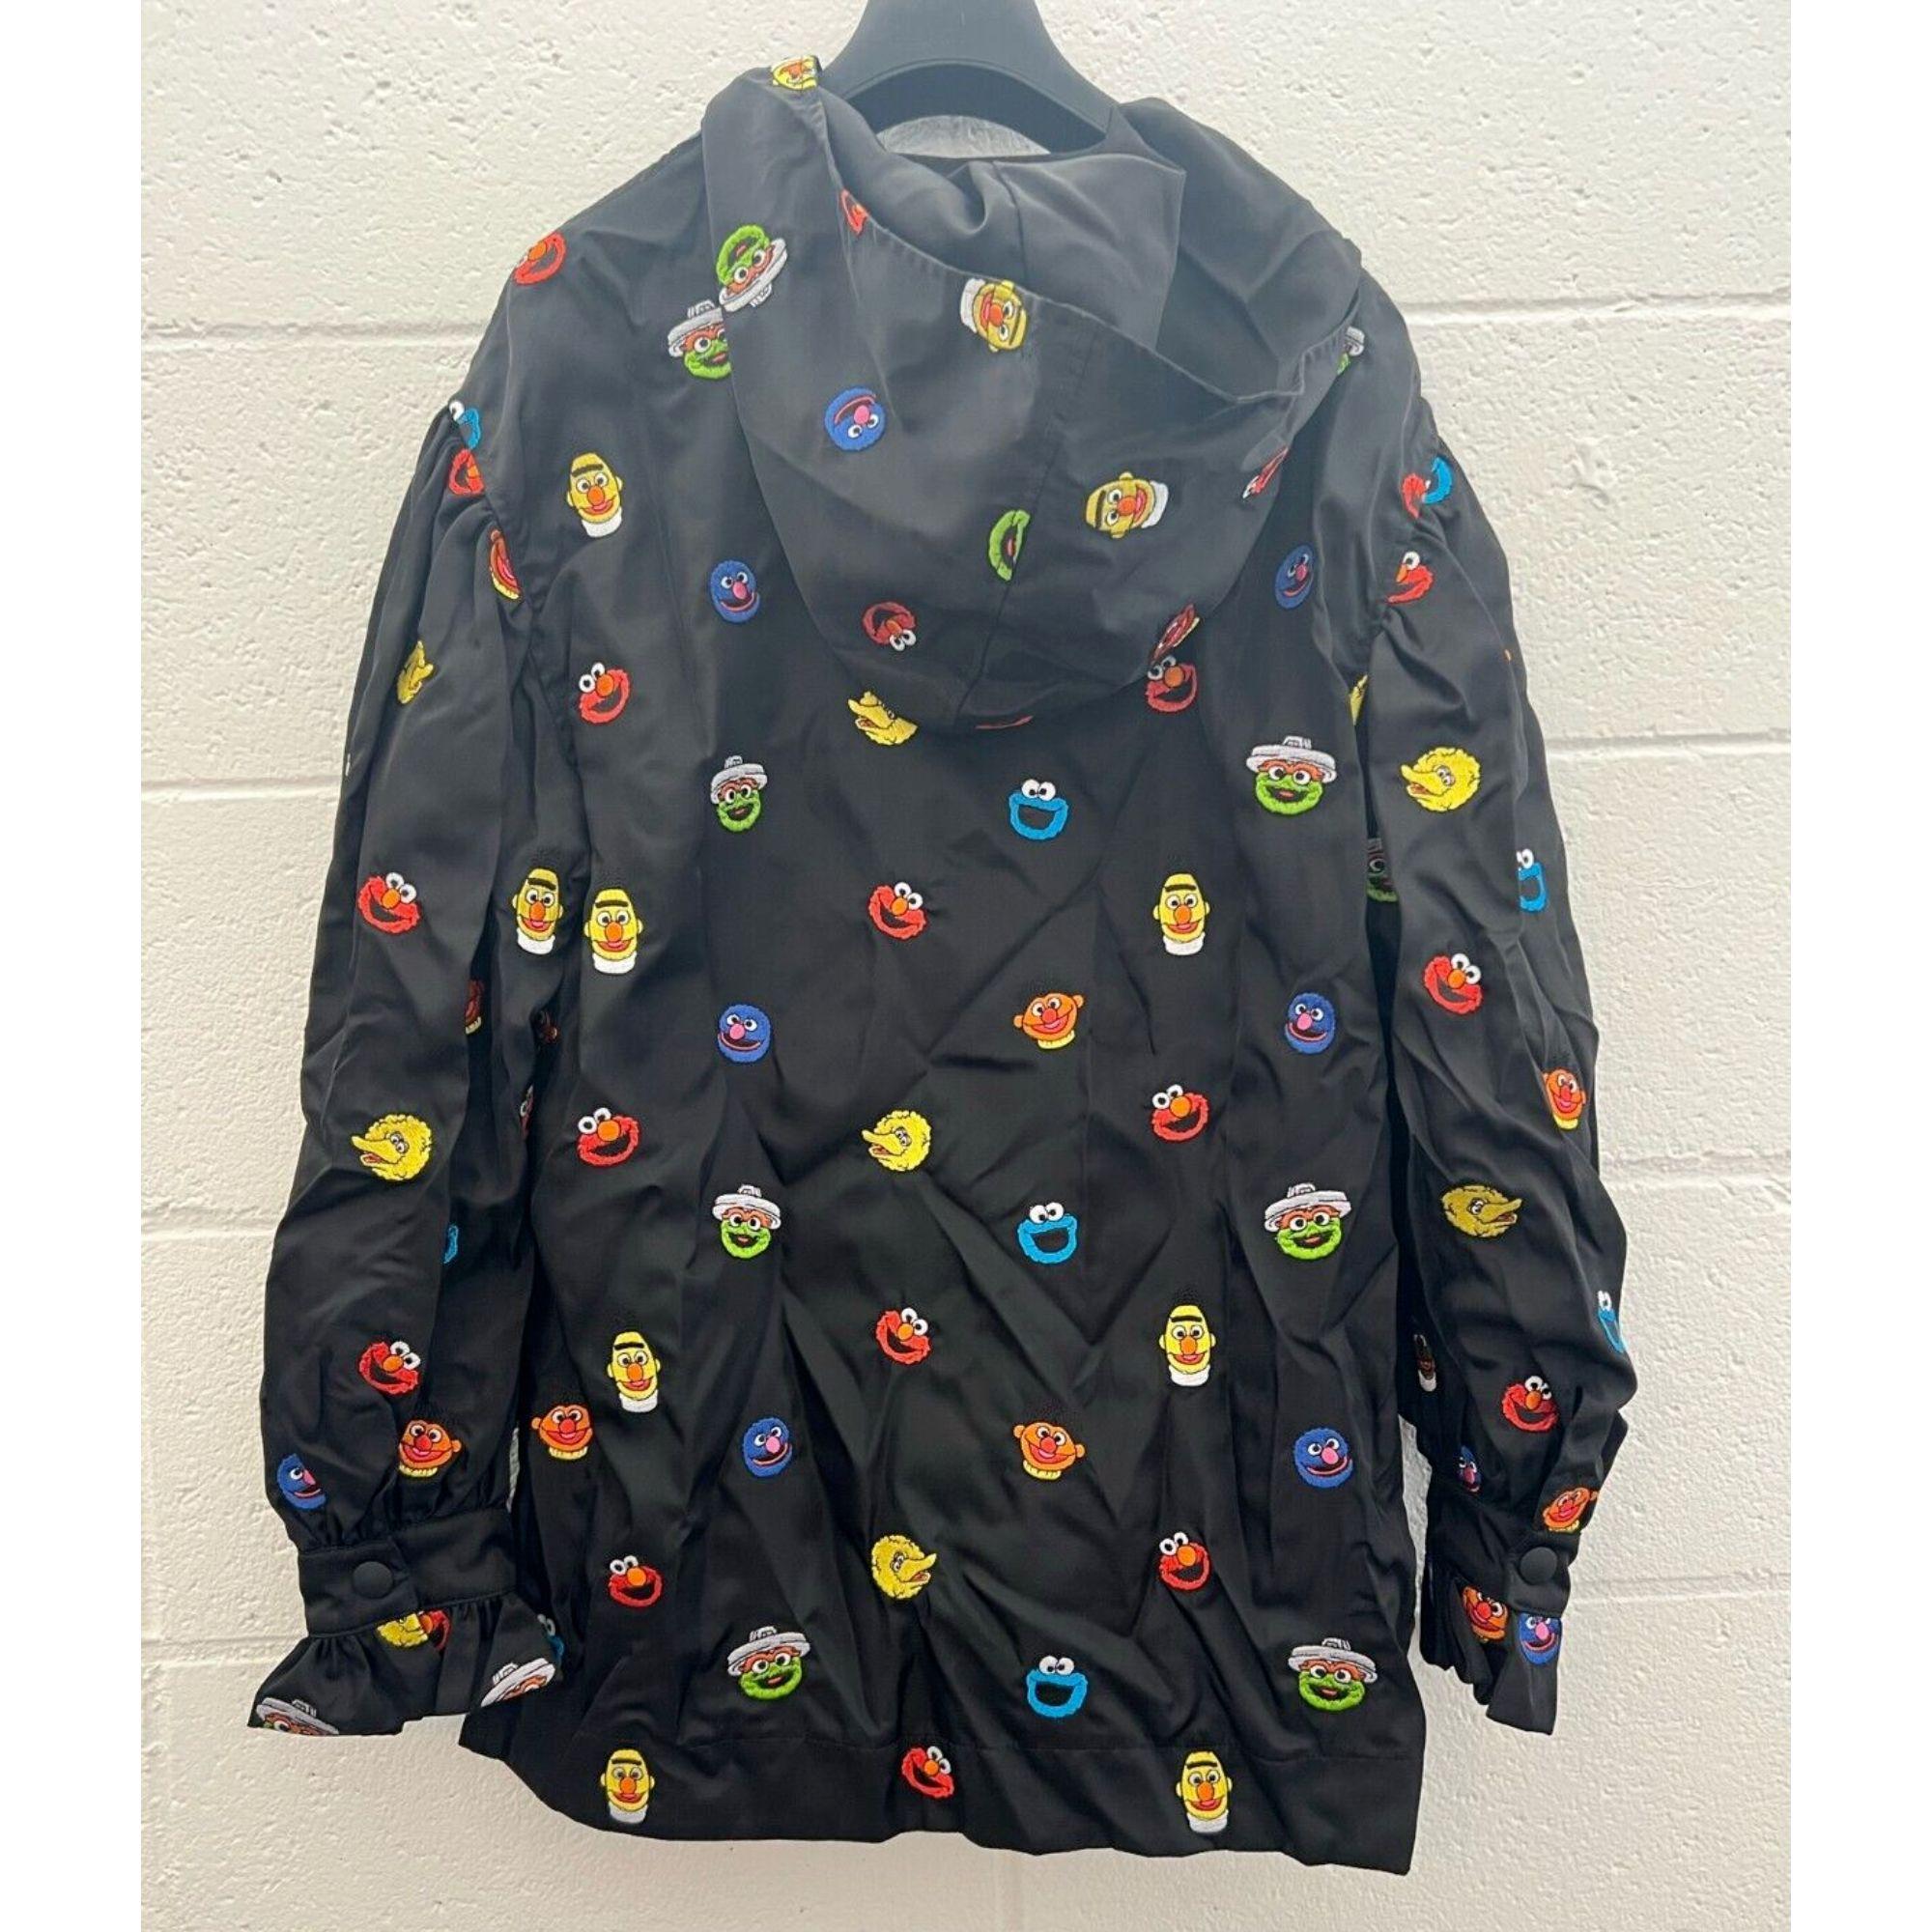 AW21 Moschino Couture Sesame Street Embroidered Hooded Jacket by Jeremy Scott For Sale 5